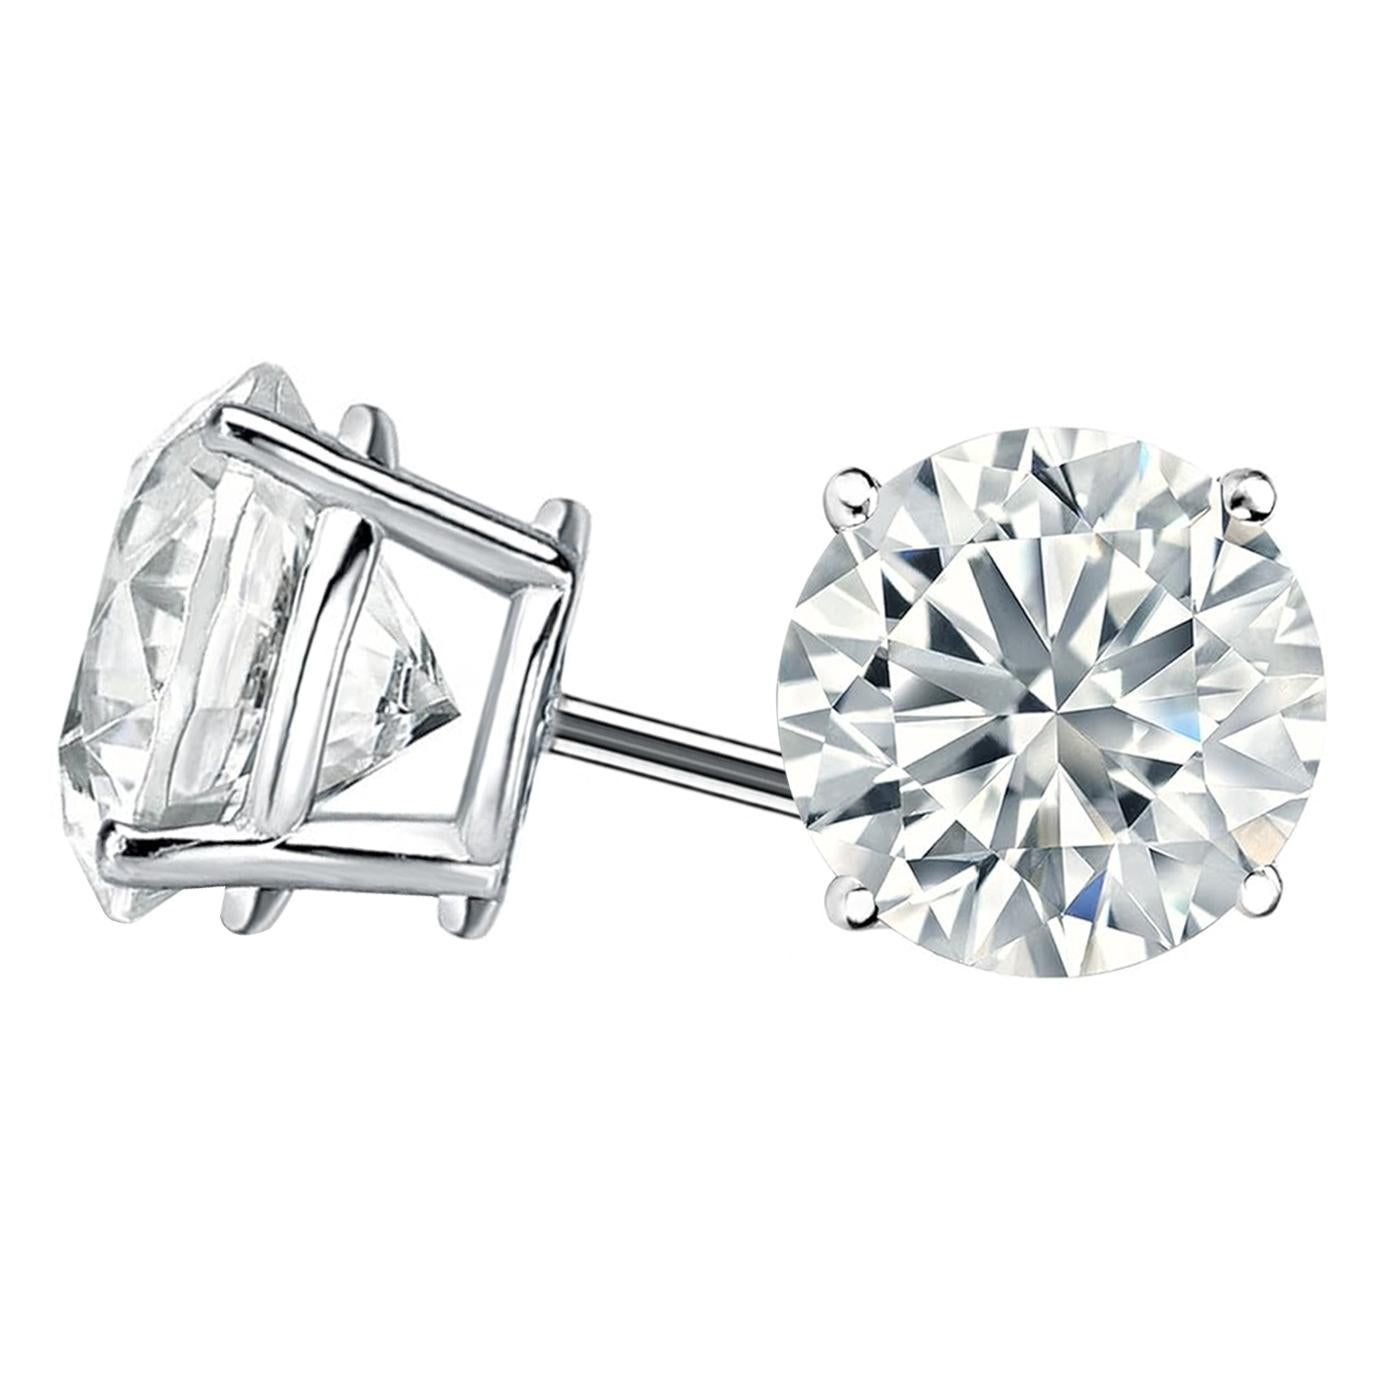 A stunning pair of round diamonds set in a four-prong 